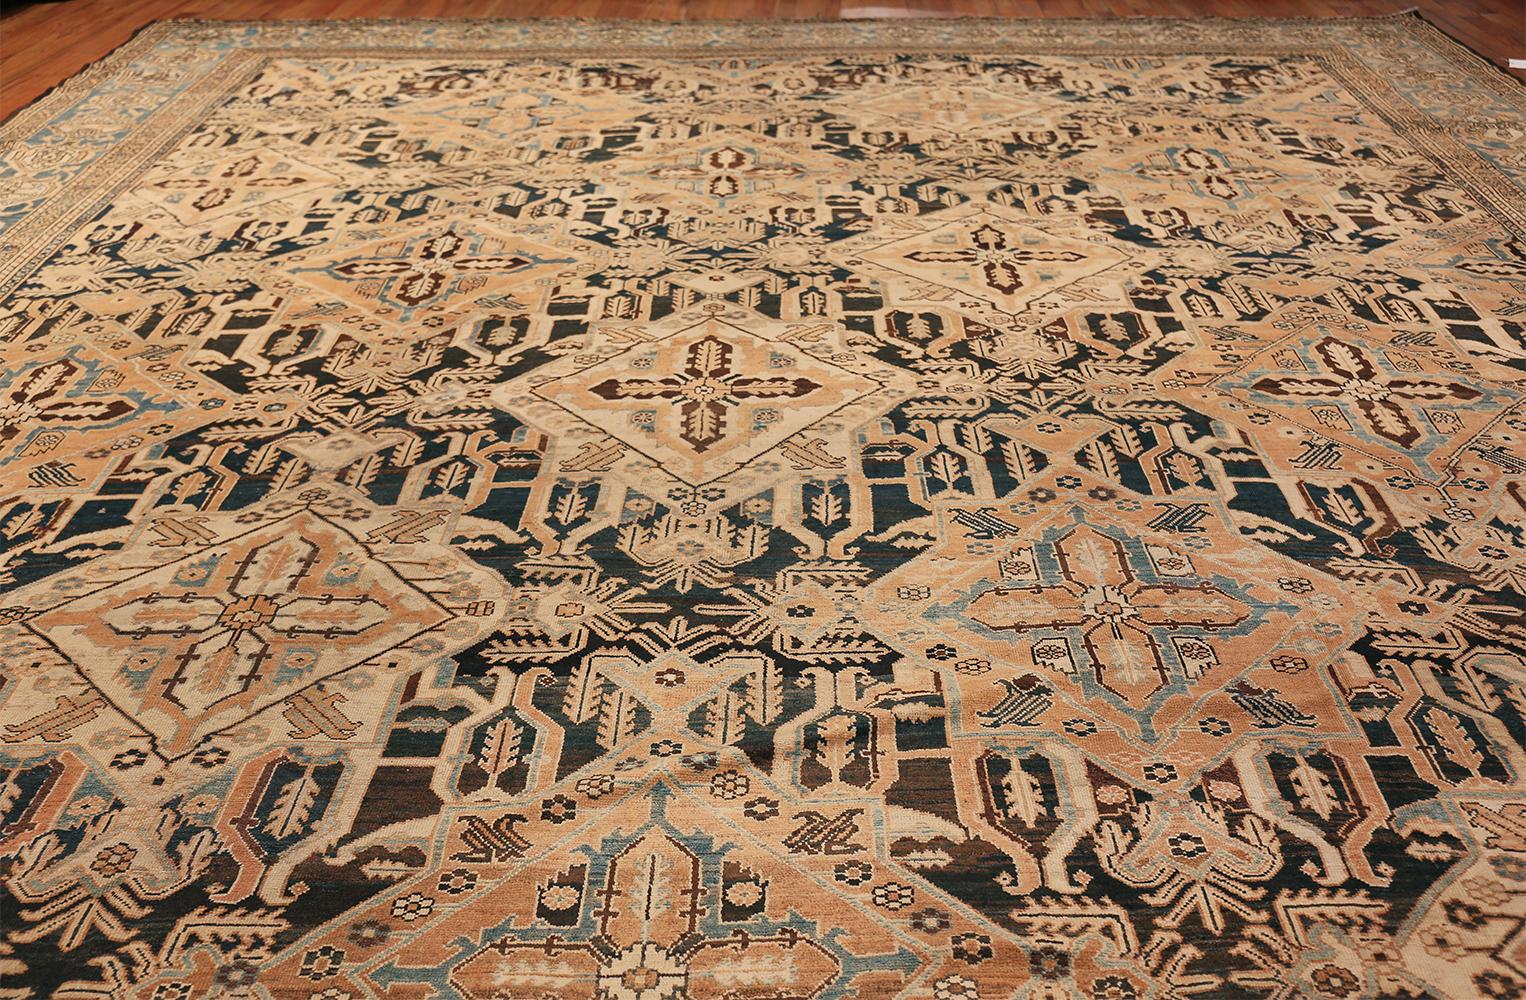 Beautiful Tribal Antique Oversized Persian Bakhtirari Rug, Country of Origin / Rug Type: Persian Rug, Circa Date: Late 19th Century. Size: 15 ft x 30 ft (4.57 m x 9.14 m)

A starkly intriguing large oversized tribal design covers the body of this